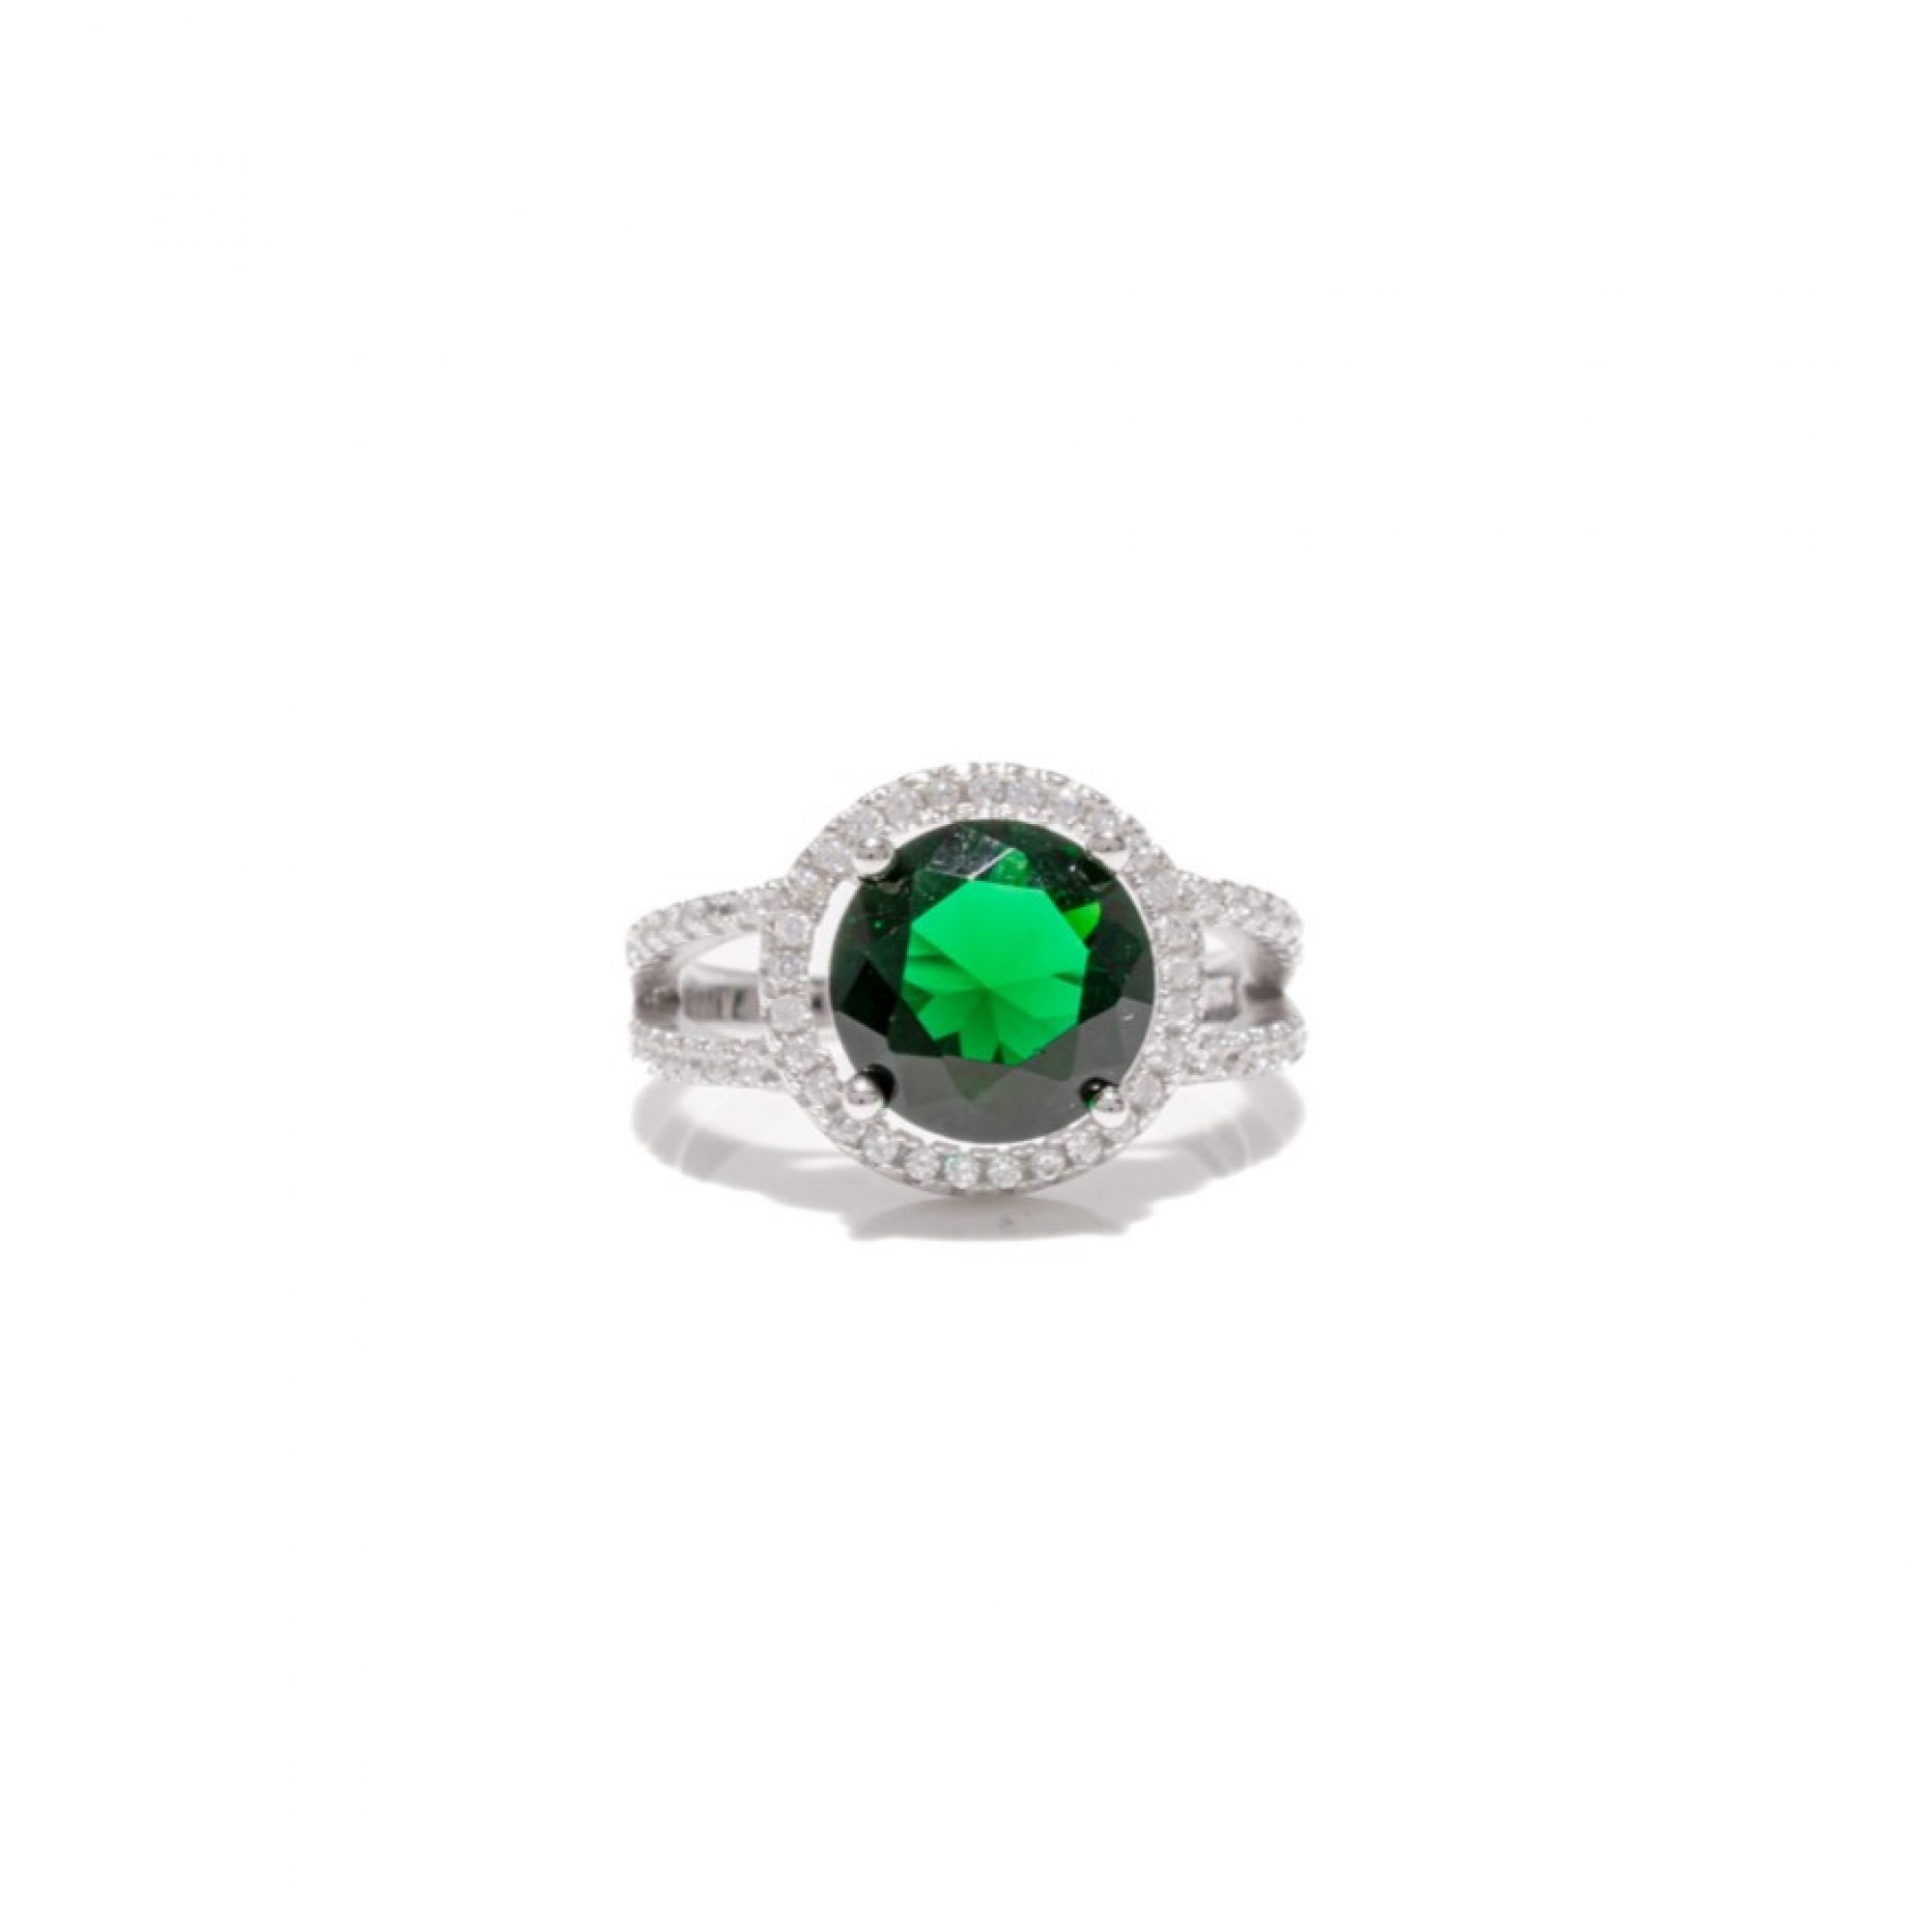 Ring with emerald and zircon stones